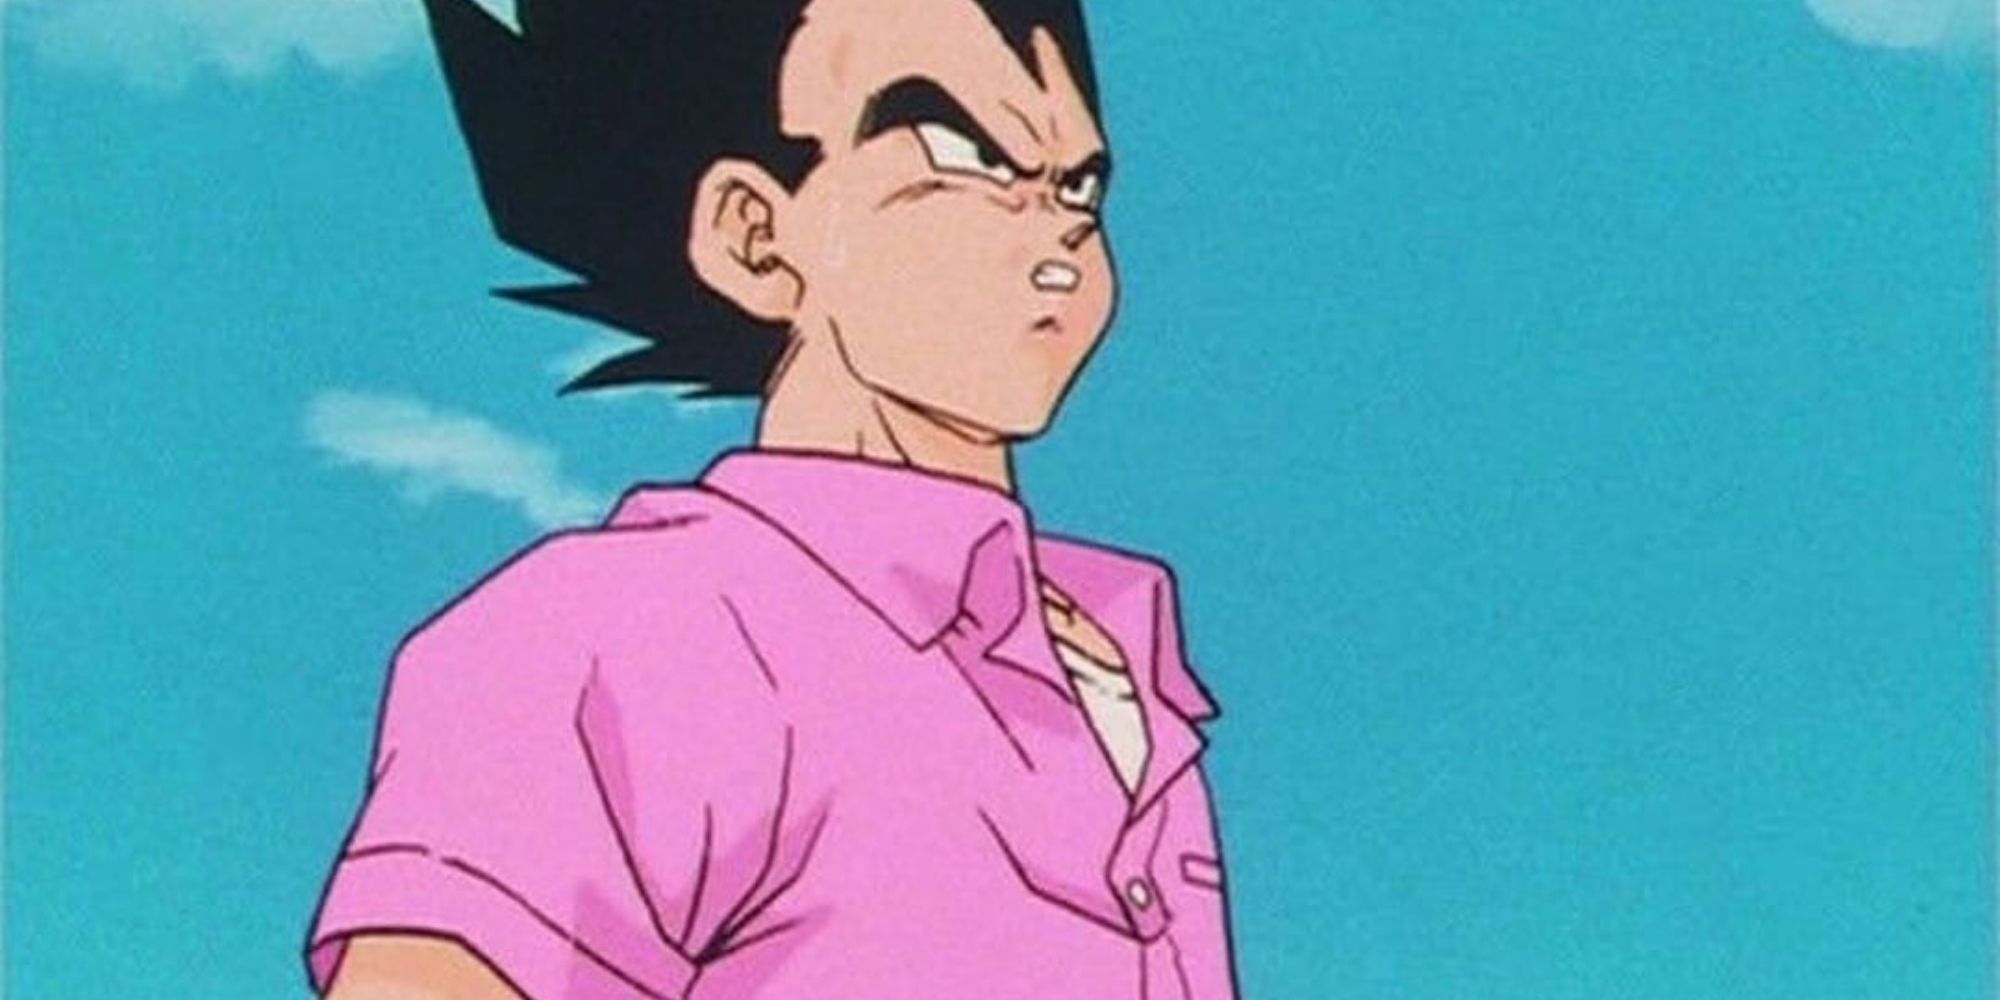 Vegeta looking mad in Dragon Ball Z